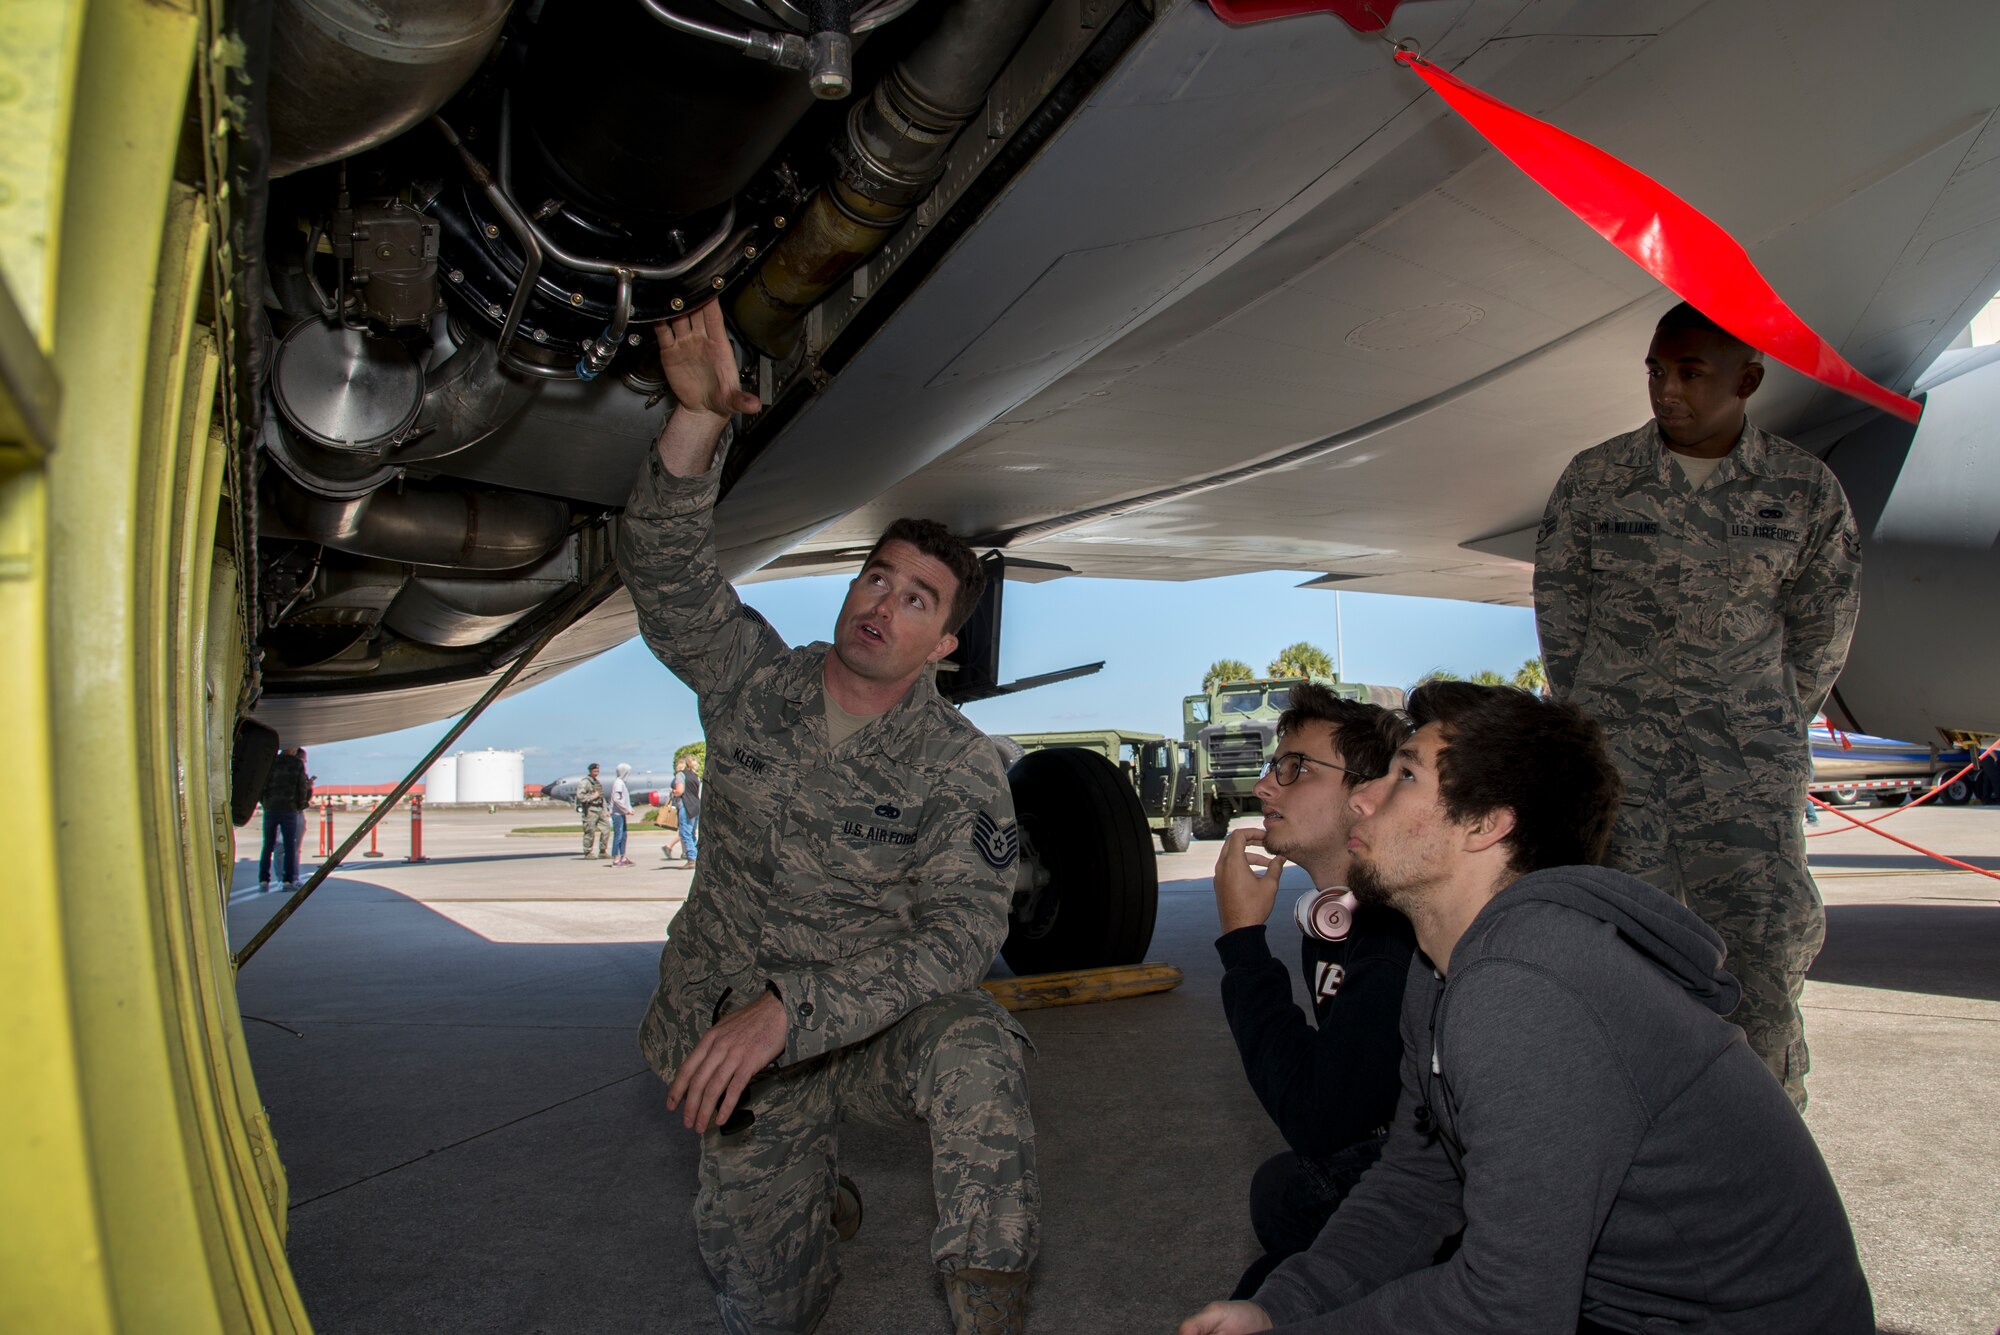 U.S. Air Force Tech. Sgt. Jonathan Klenk, an electrical and environmental technician assigned to 6th Aircraft Maintenance Squadron, shows the air condition system of a KC-135 Stratotanker aircraft during the Science, Technology, Engineering, Arts and Math (STEAM) Day at MacDill Air Force Base, Fla., March 21, 2018.